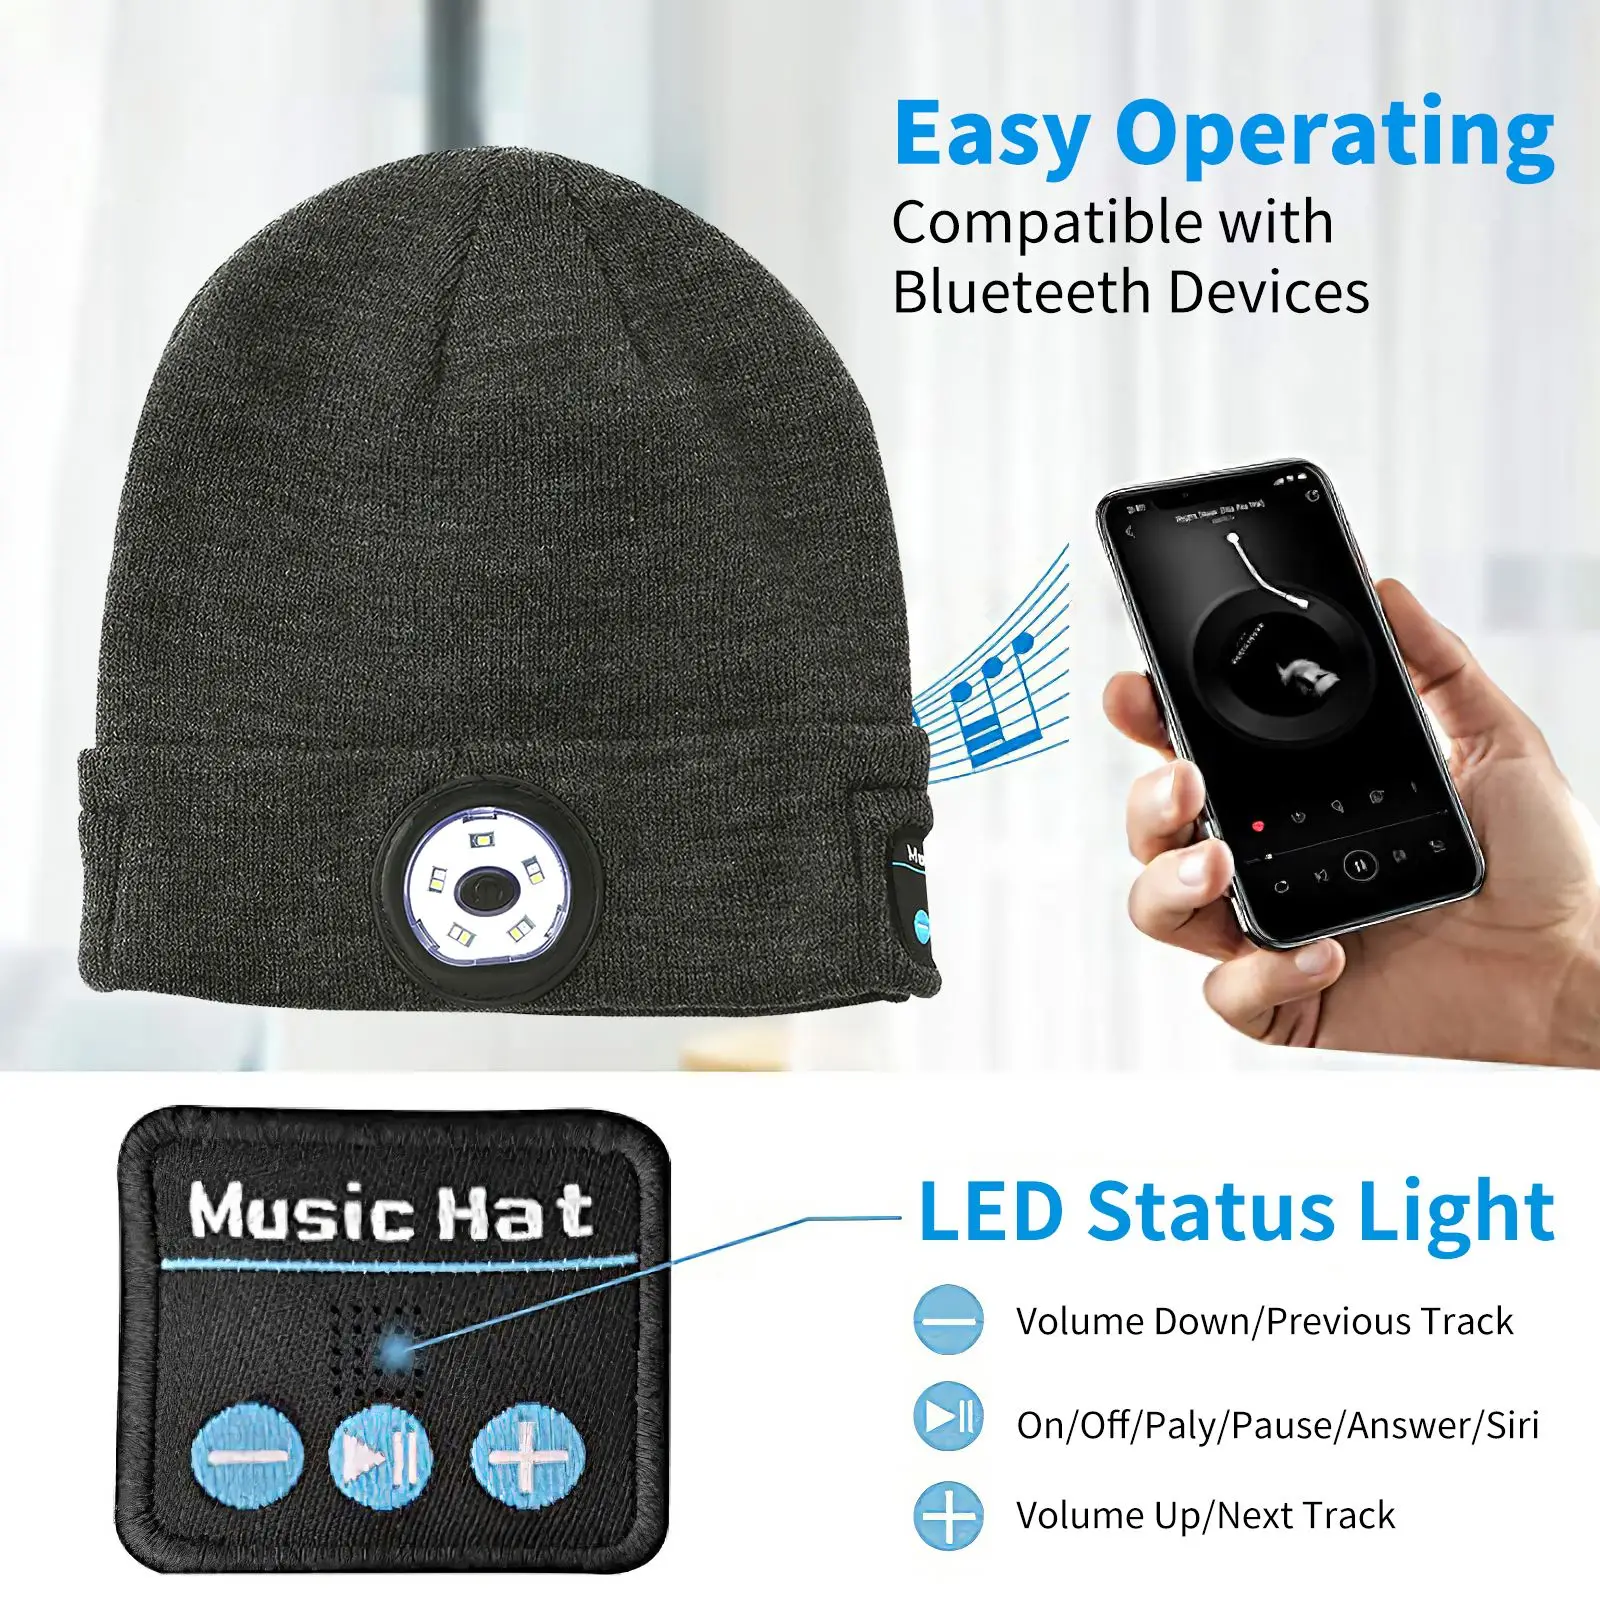 

Warm Winter Bright Knit 5 LED Beanie Hat with Light USB Rechargeable Lighted Headlamp Torch Cap Winter Running Gear Gift